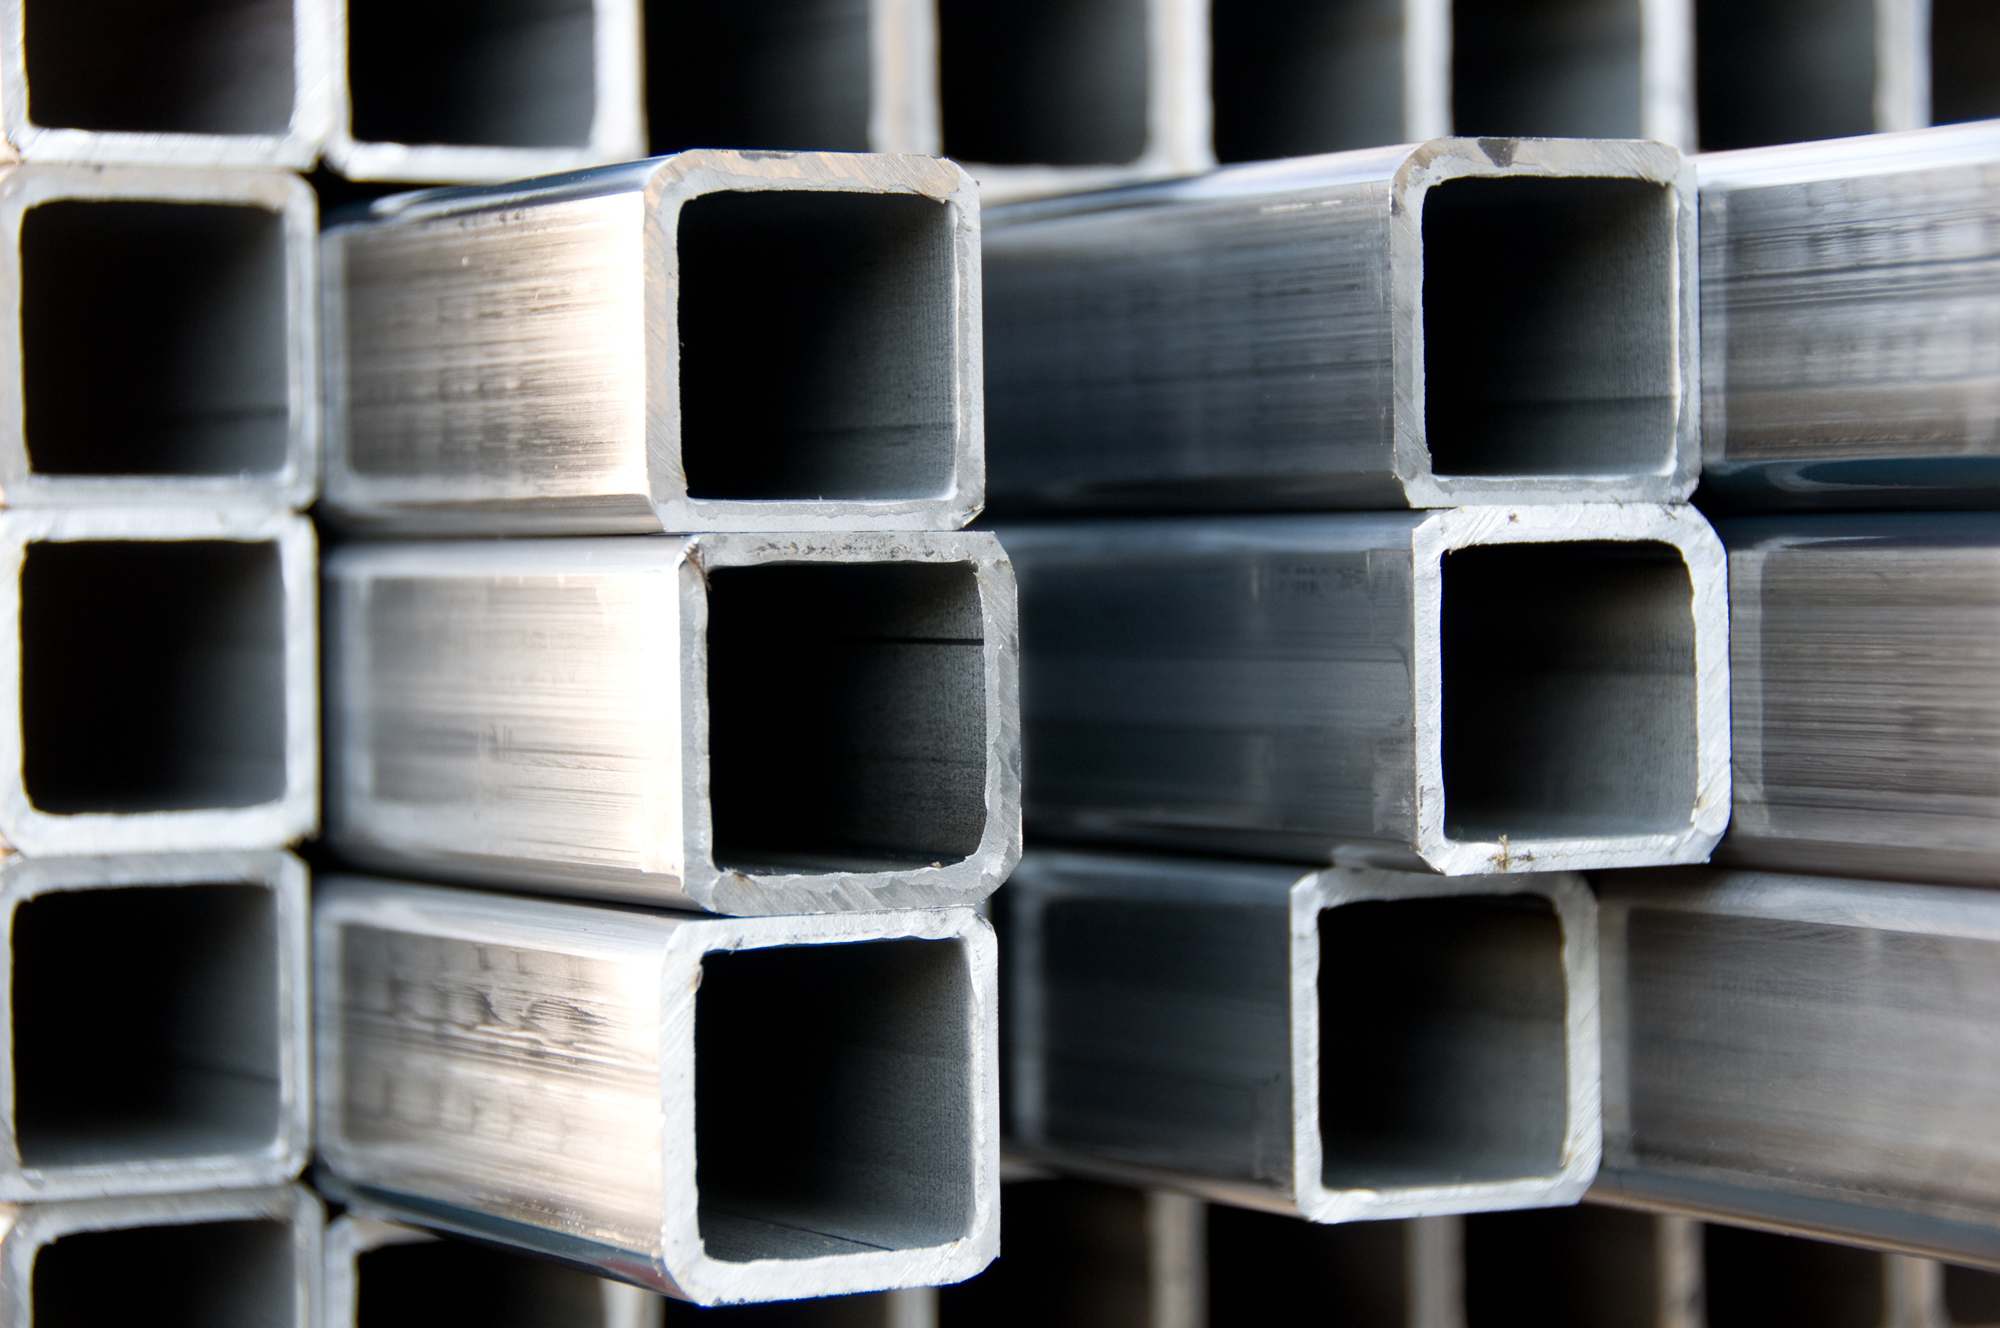 Protruding square carbon metal tubing.View related industrial and manufacturing employee images in this lightbox: